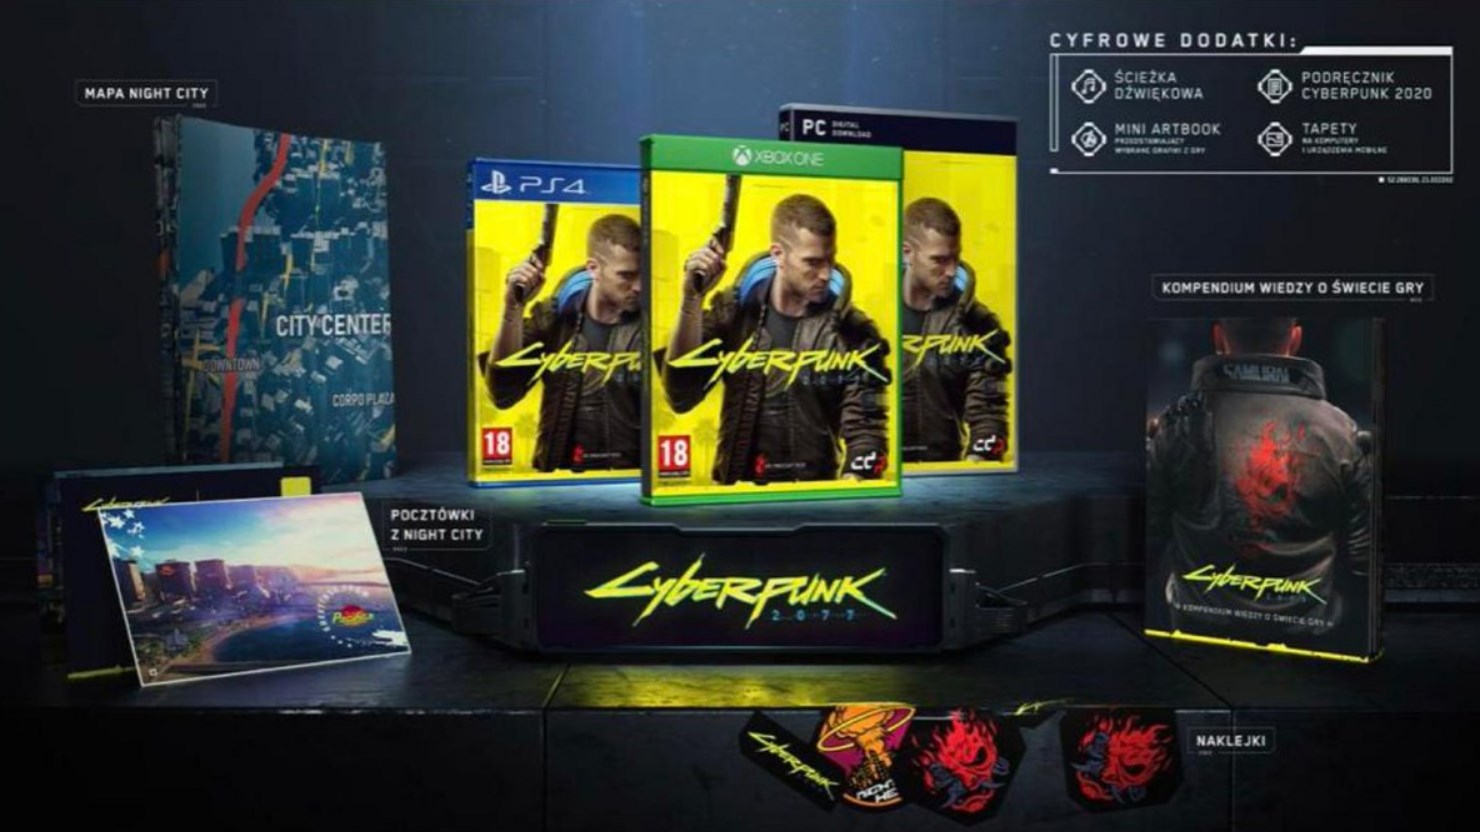 Rumor: Cyberpunk 2077 Collector’s Edition and Box Art Leaked